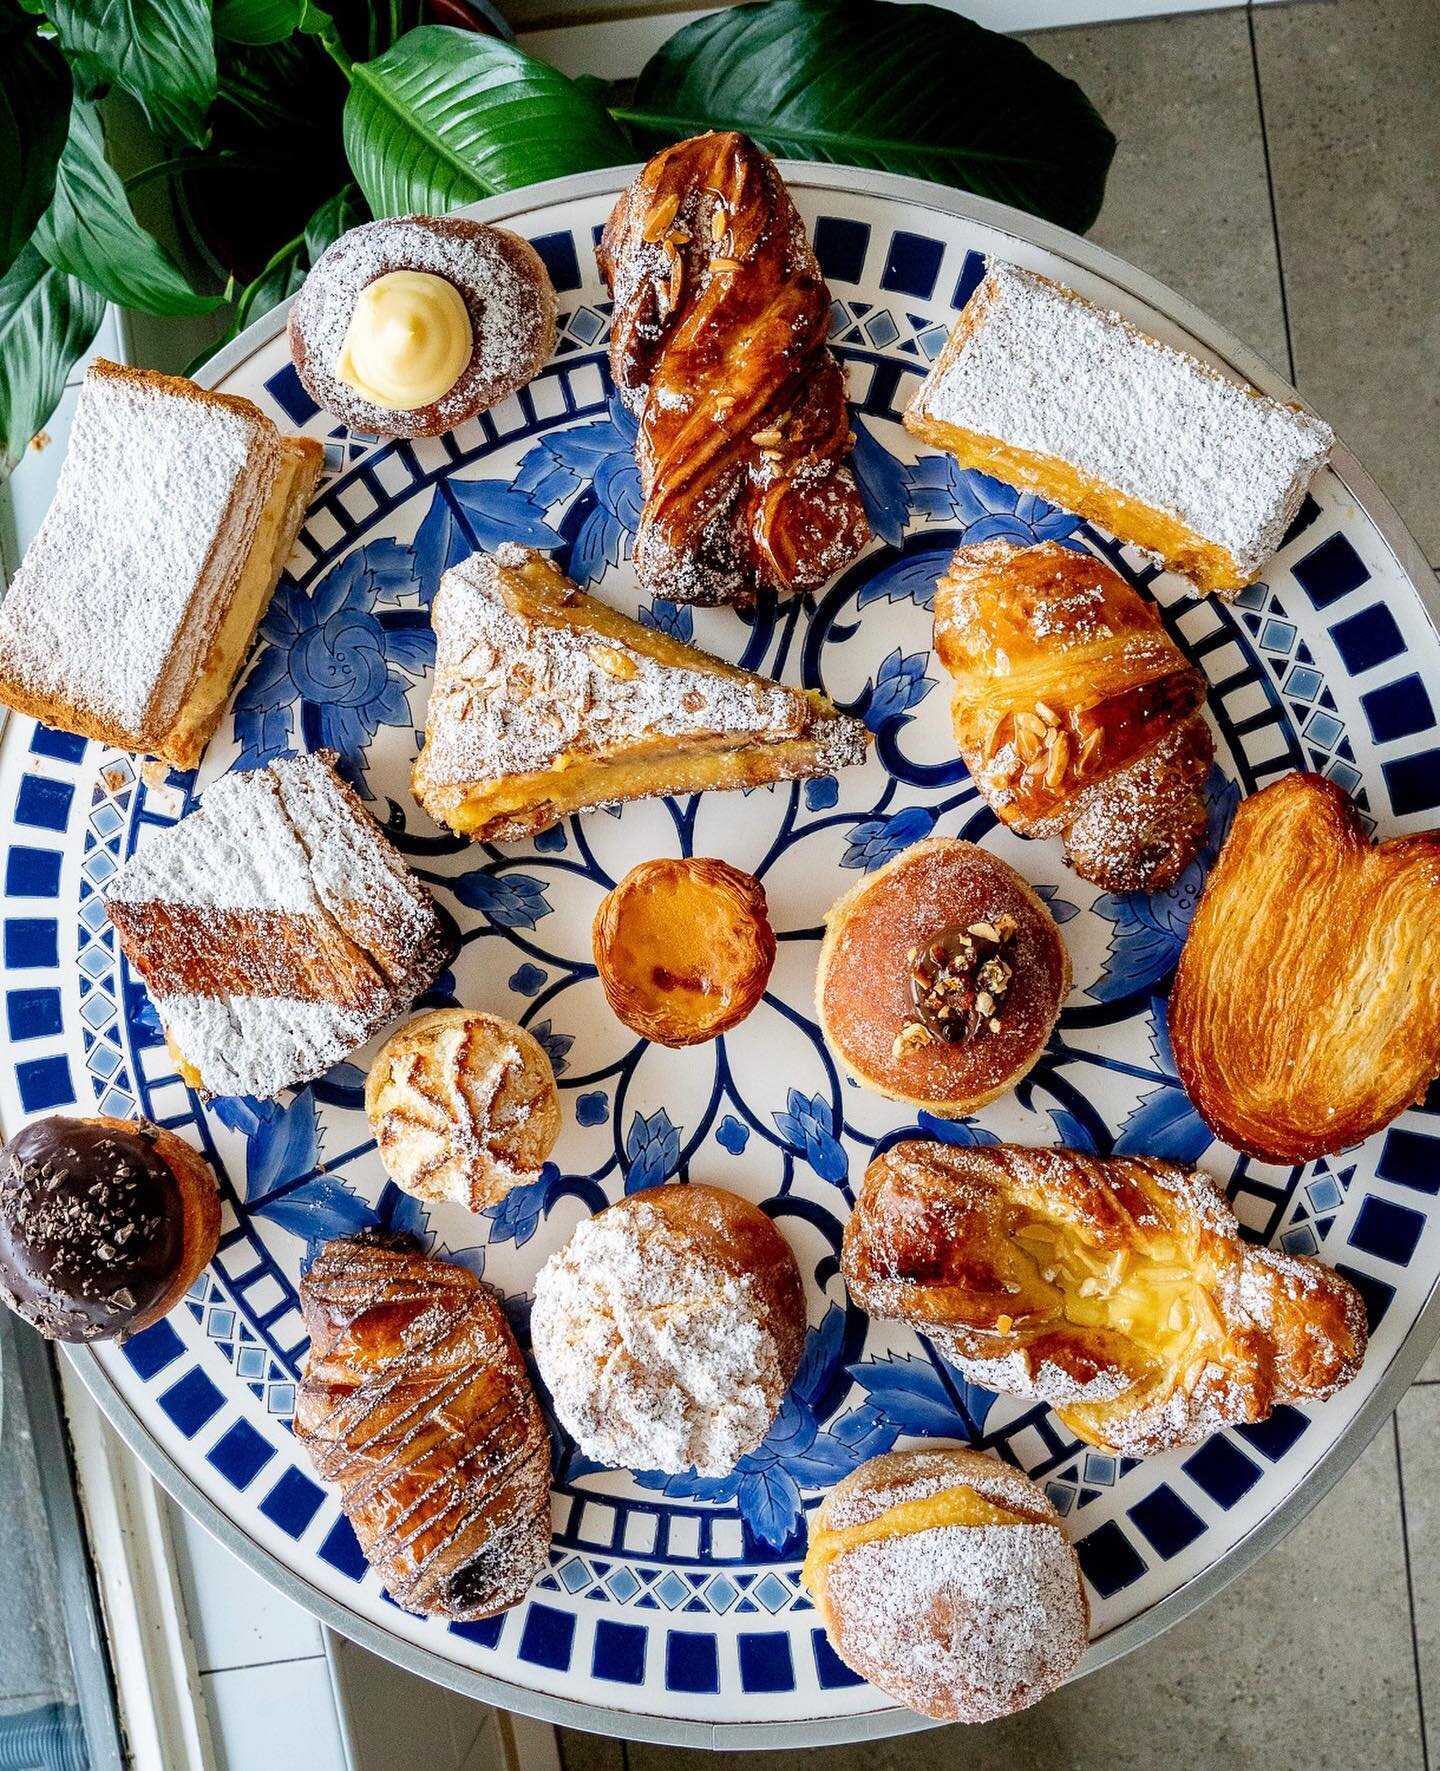 Lots to love! Come see us about our free range Portuguese tarts and all our viennoseries!

From cakes, tarts to donuts. Yumminess waiting.

#sweetbelem